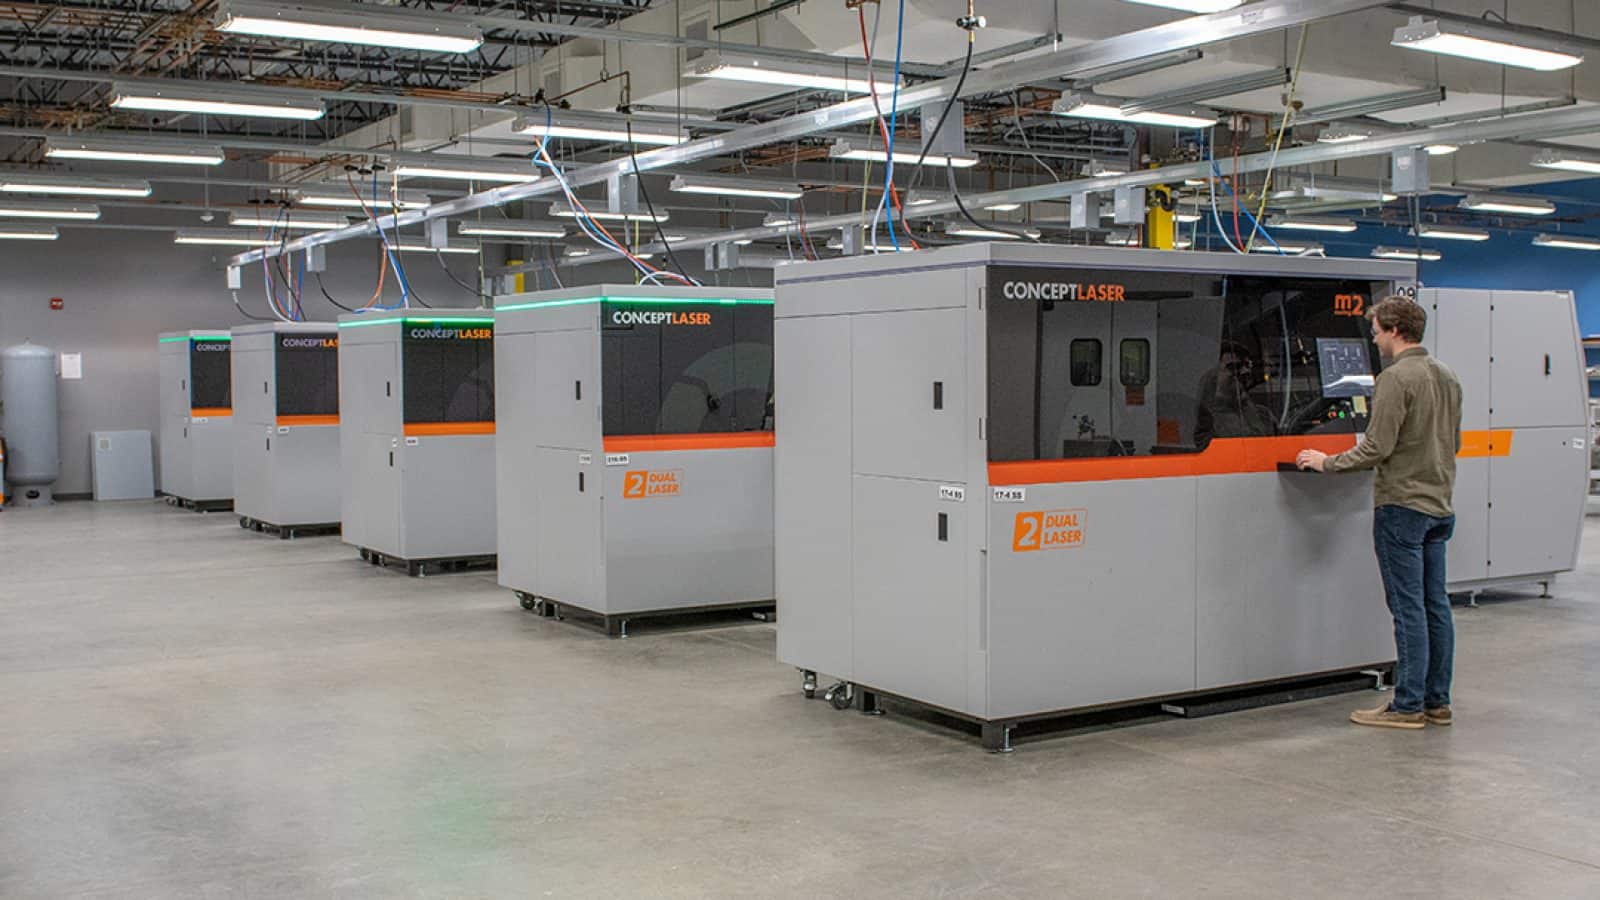 Protolabs’ state-of-the-art 3D printing facility